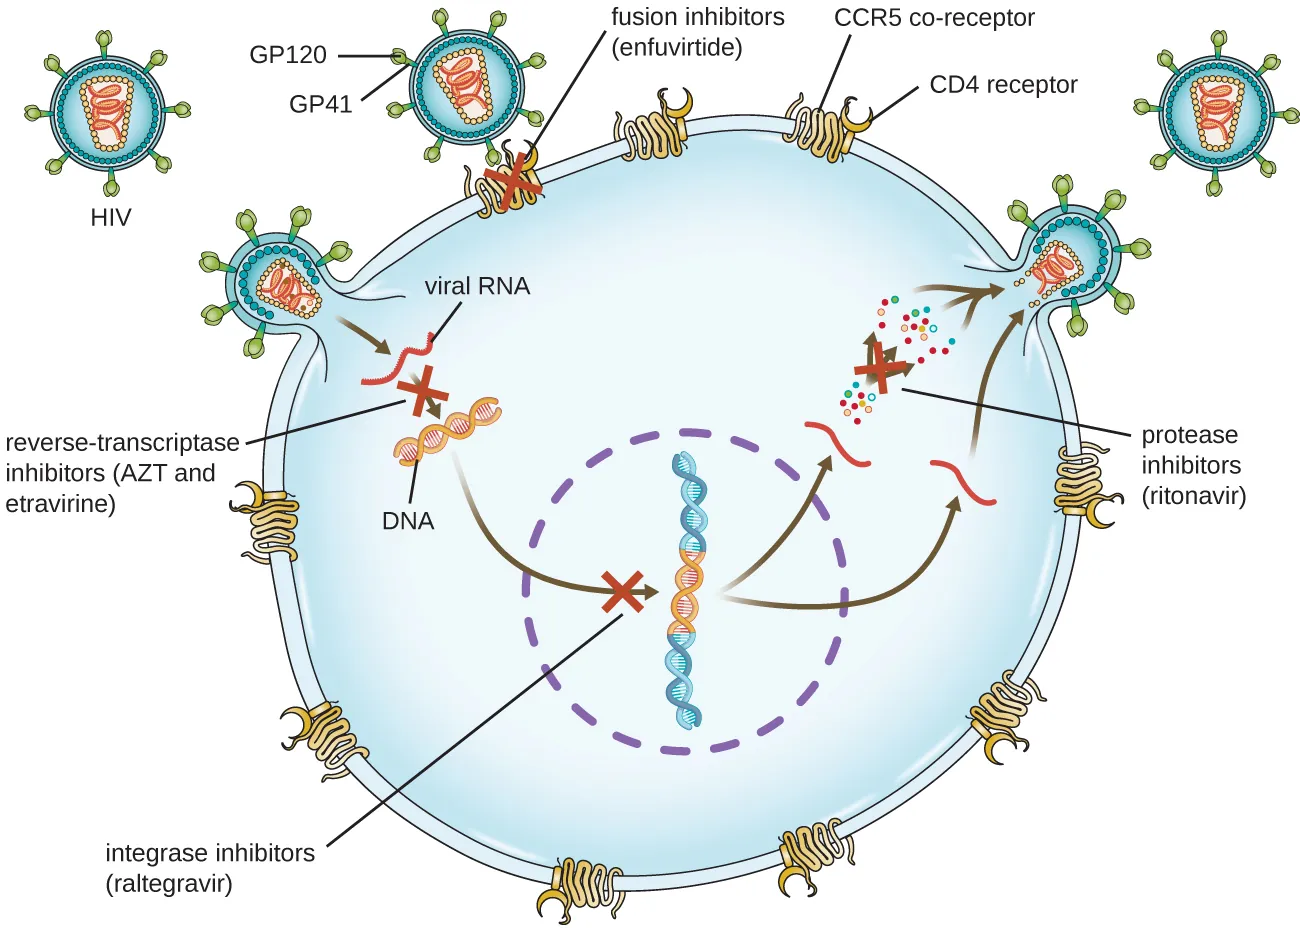 Diagram showing HIV infection and locations where drugs can stop the infection. GP120 and G(42 are proteins that are on the surface of the virus and bind to CD4 receptor and CCR5. Enfuvirtide is a fusion inhibitor that blocks this process. When the virus enters, it produces DNA from RNA, this  can be blocked by AZT and etravirine which are reverse-transcriptase inhibitors. Next, the viral DNA integrates into the host DNA. Raltegravir is an integrase inhibitor and blocks this step. Finally the virus is rebuild. Ritonavir is a protease inhibitor and blocks this step.